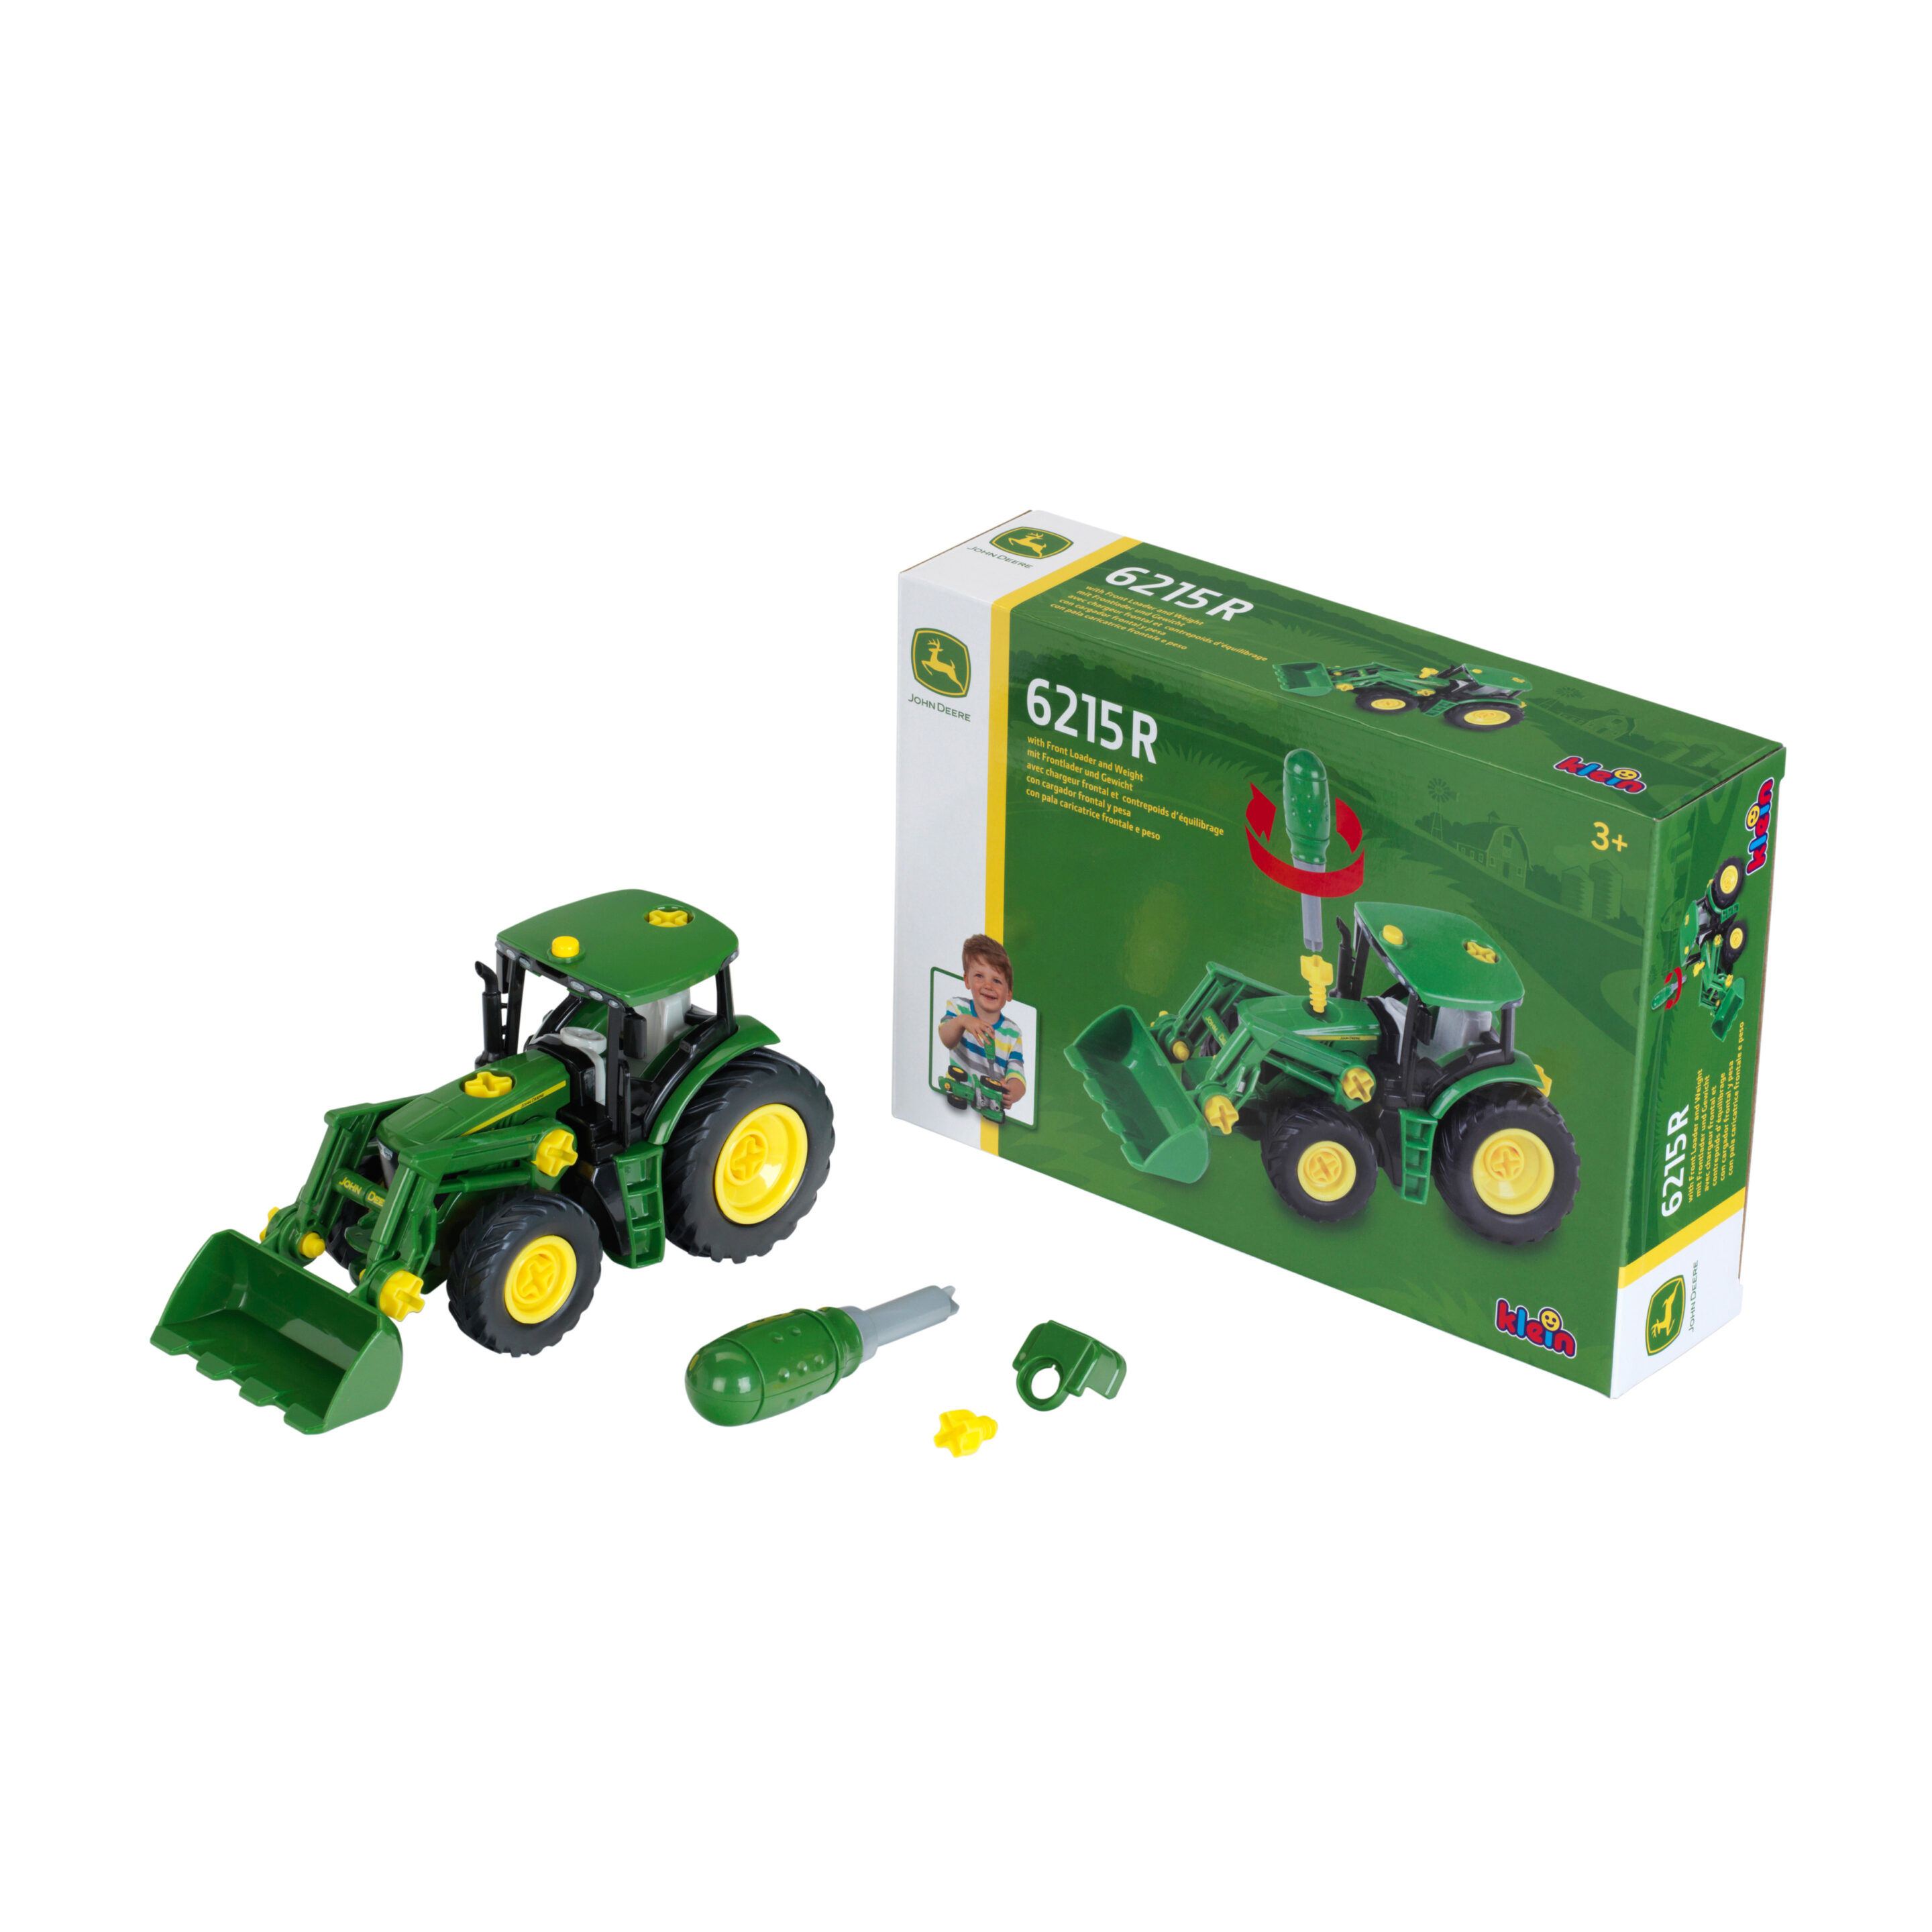 John Deere - Tractor with front loader and weight, 1:24